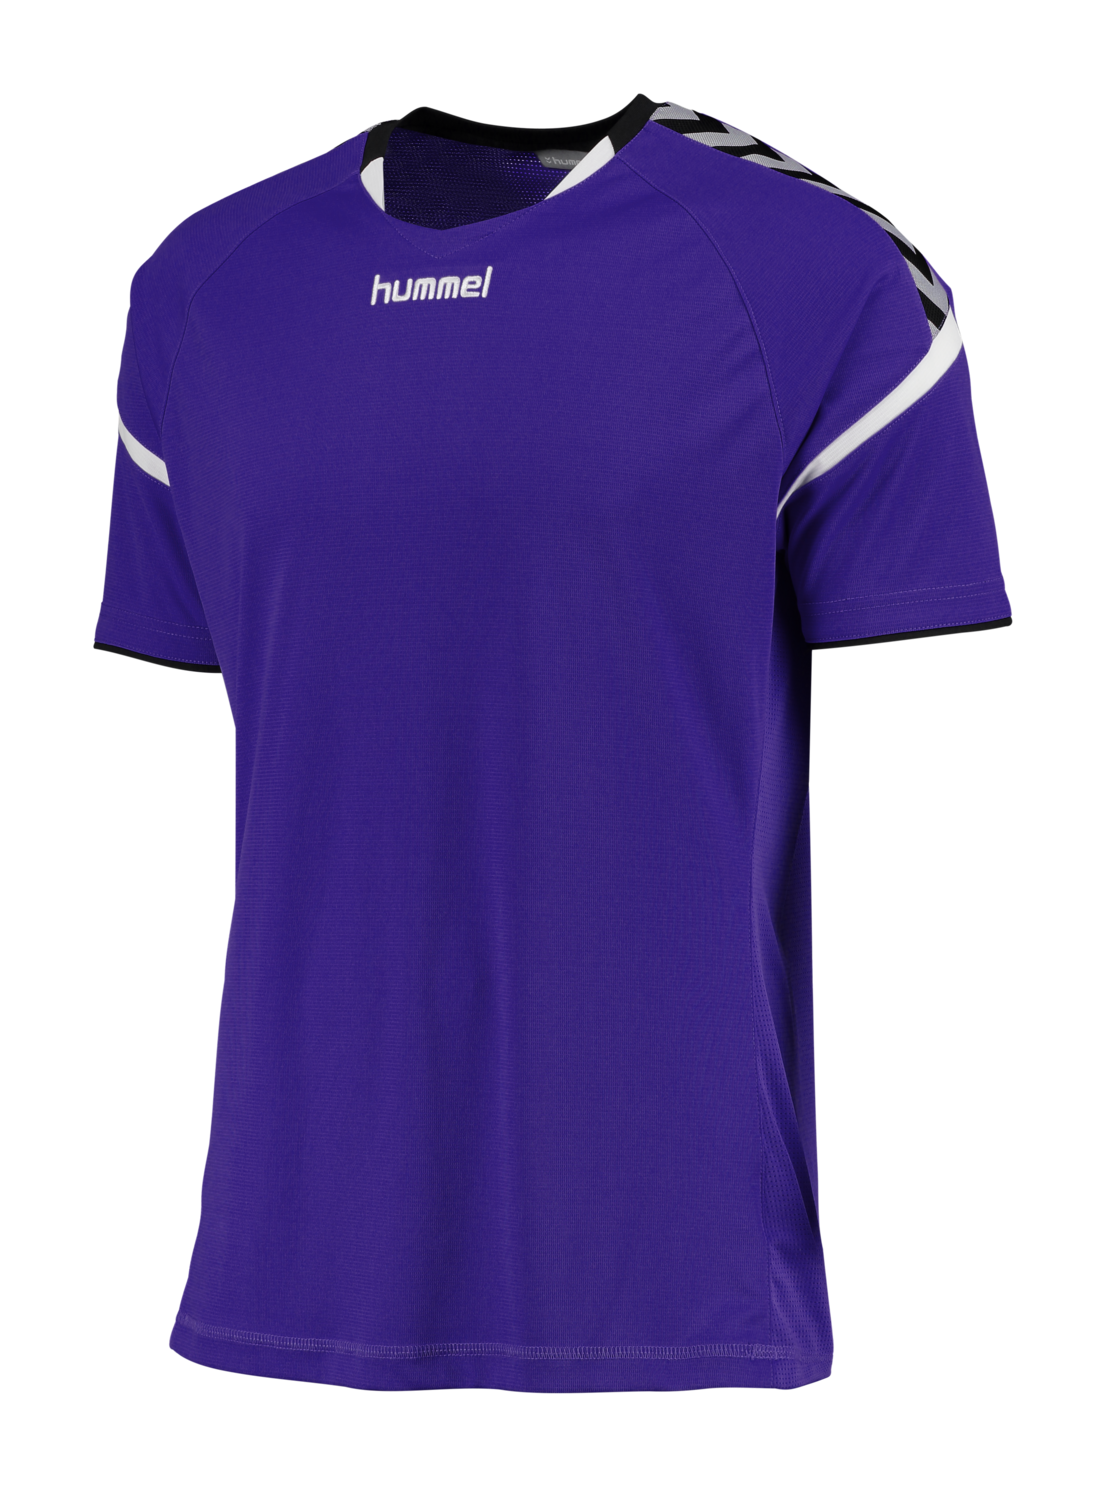 hummel Herren Auth Charge Ss Poly Jersey Trikot